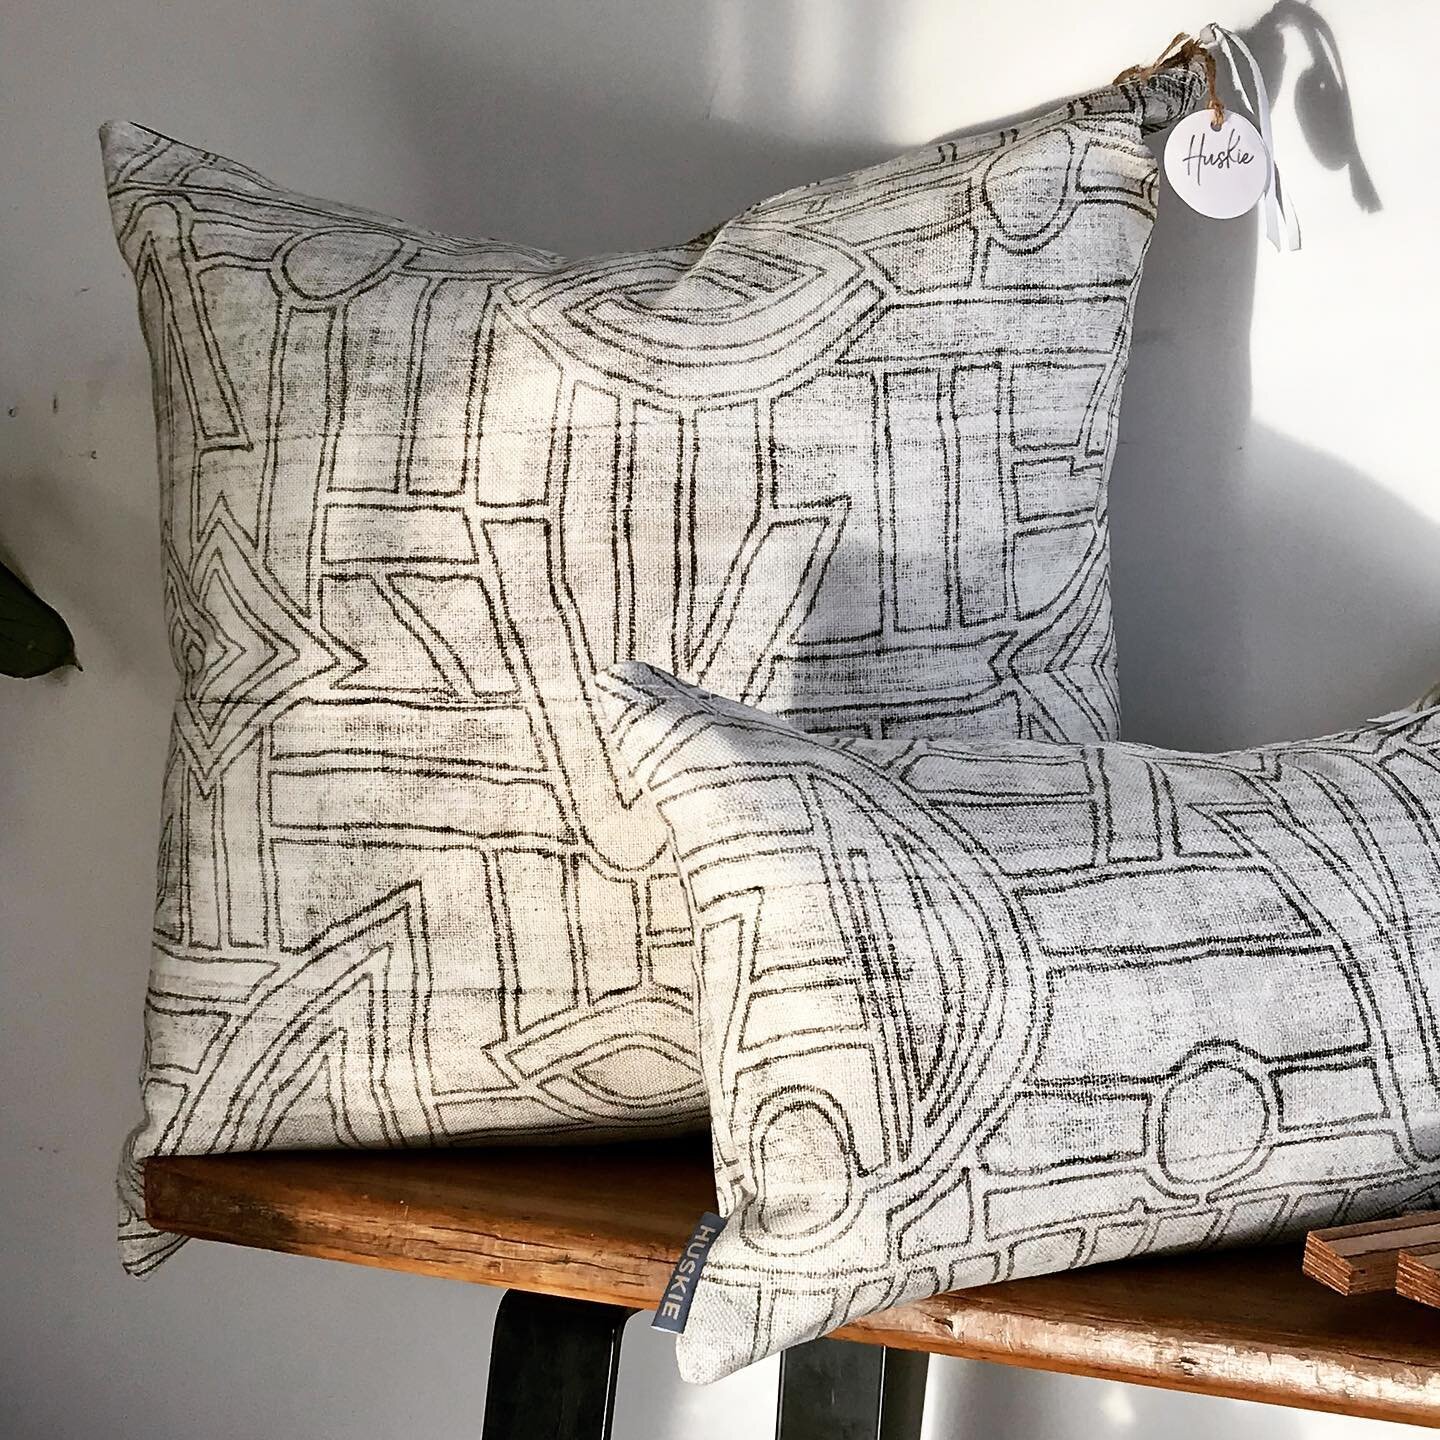 The LOST WORLD collection
 ♢︎ ♢︎ ♢︎ ♢︎ ♢︎ 

Textural, neutral tones and simple geometric ♡︎

Add natural elegance to your living space with these beautifully handmade cushions by local designer HUSKIE. 

#handmadecushions
#sustainablefabrics
#nzartis